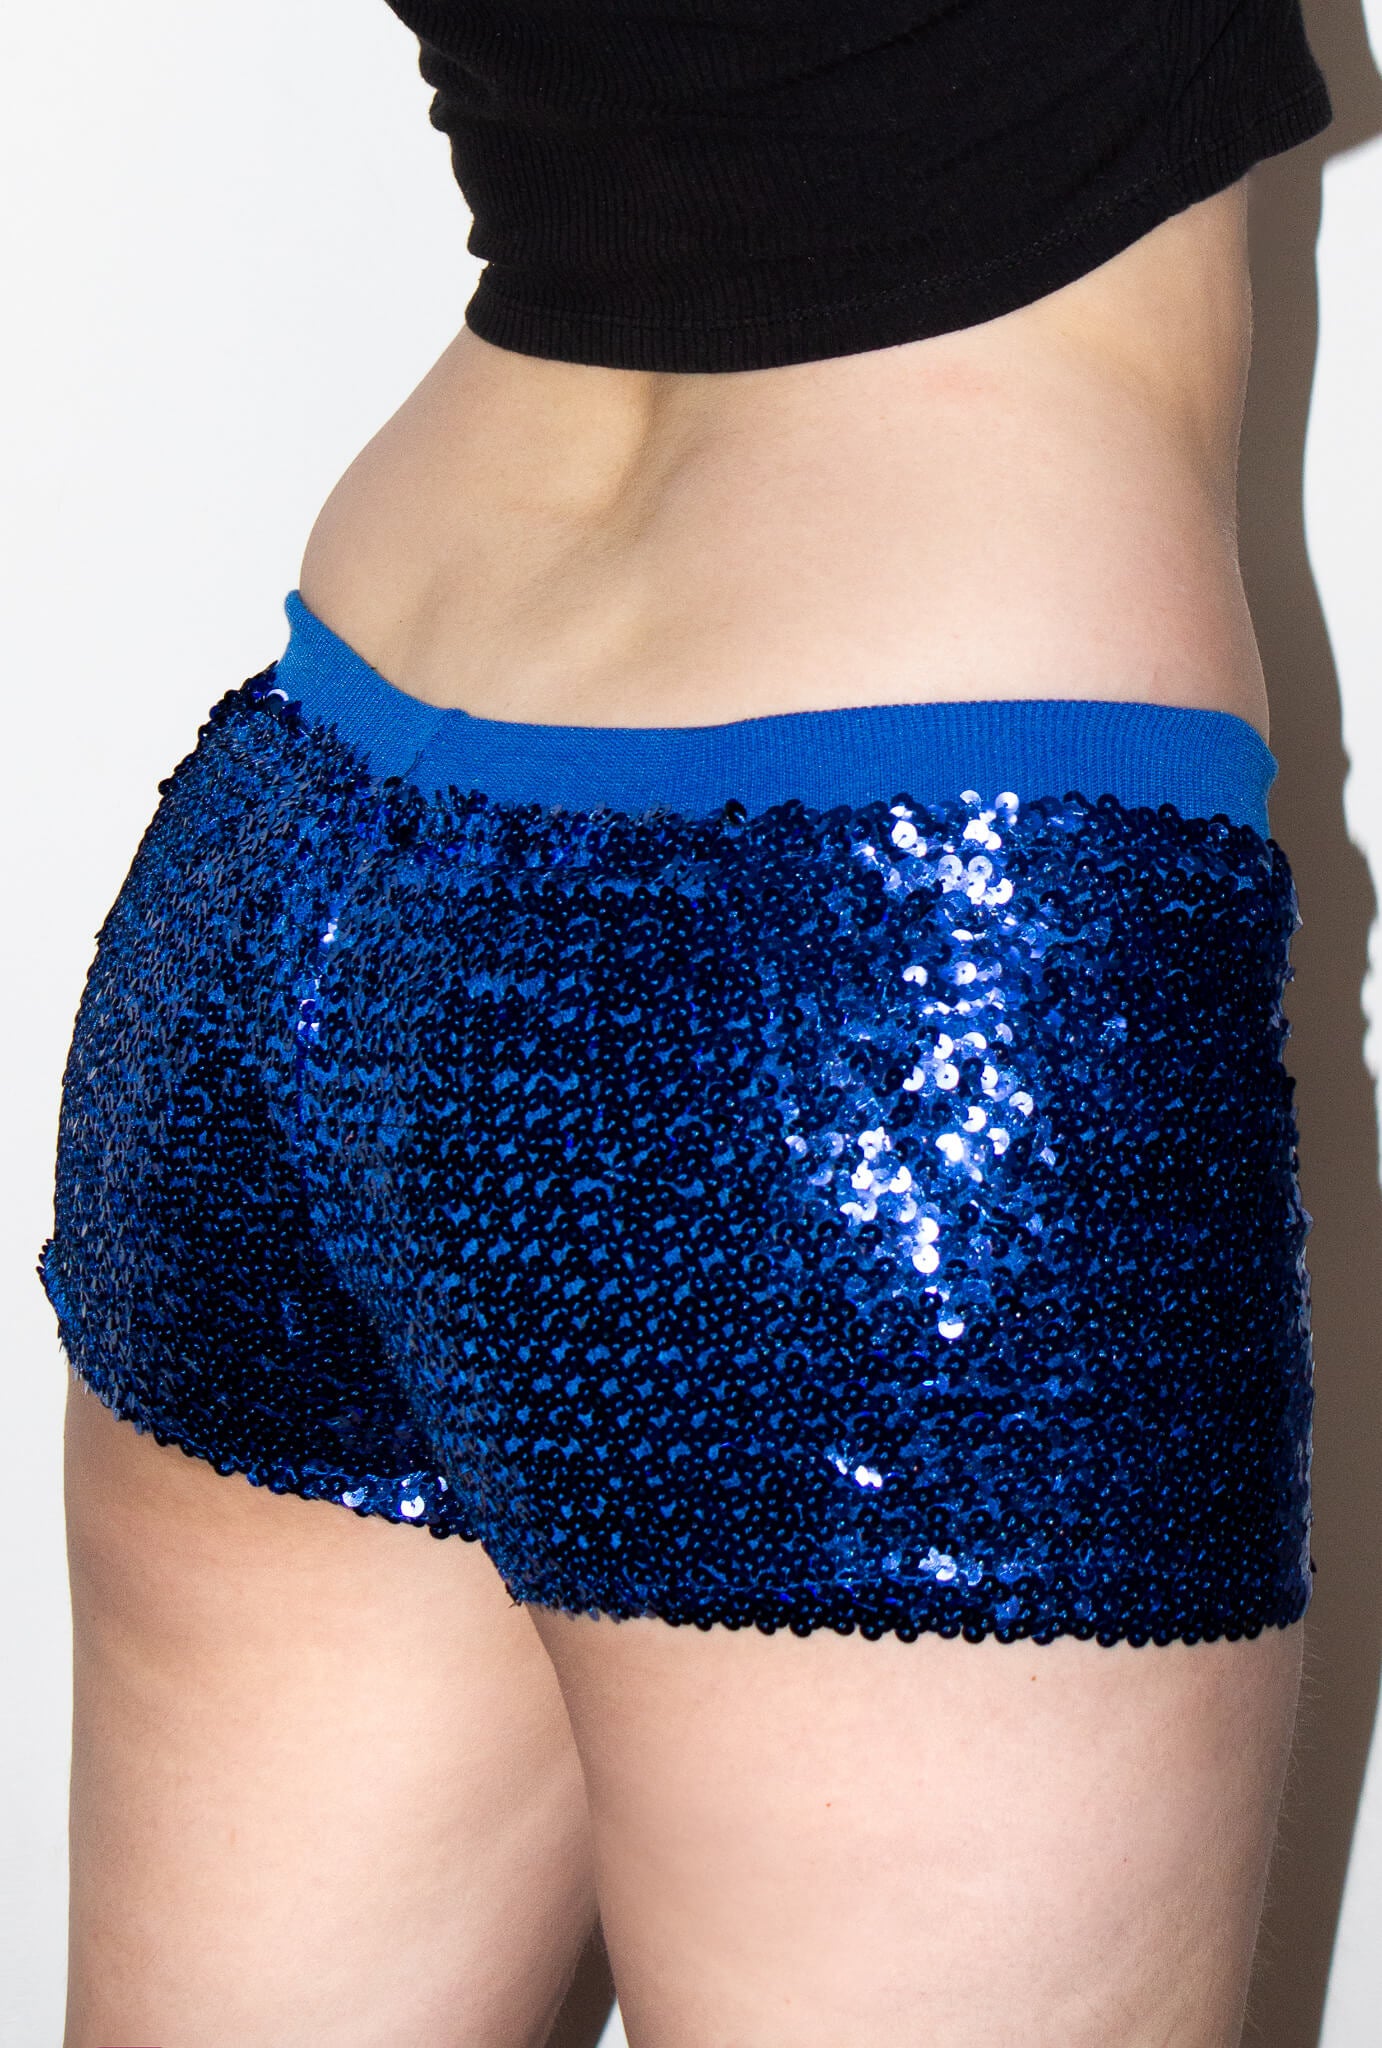 Sequin Royal Blue Booty Shorts